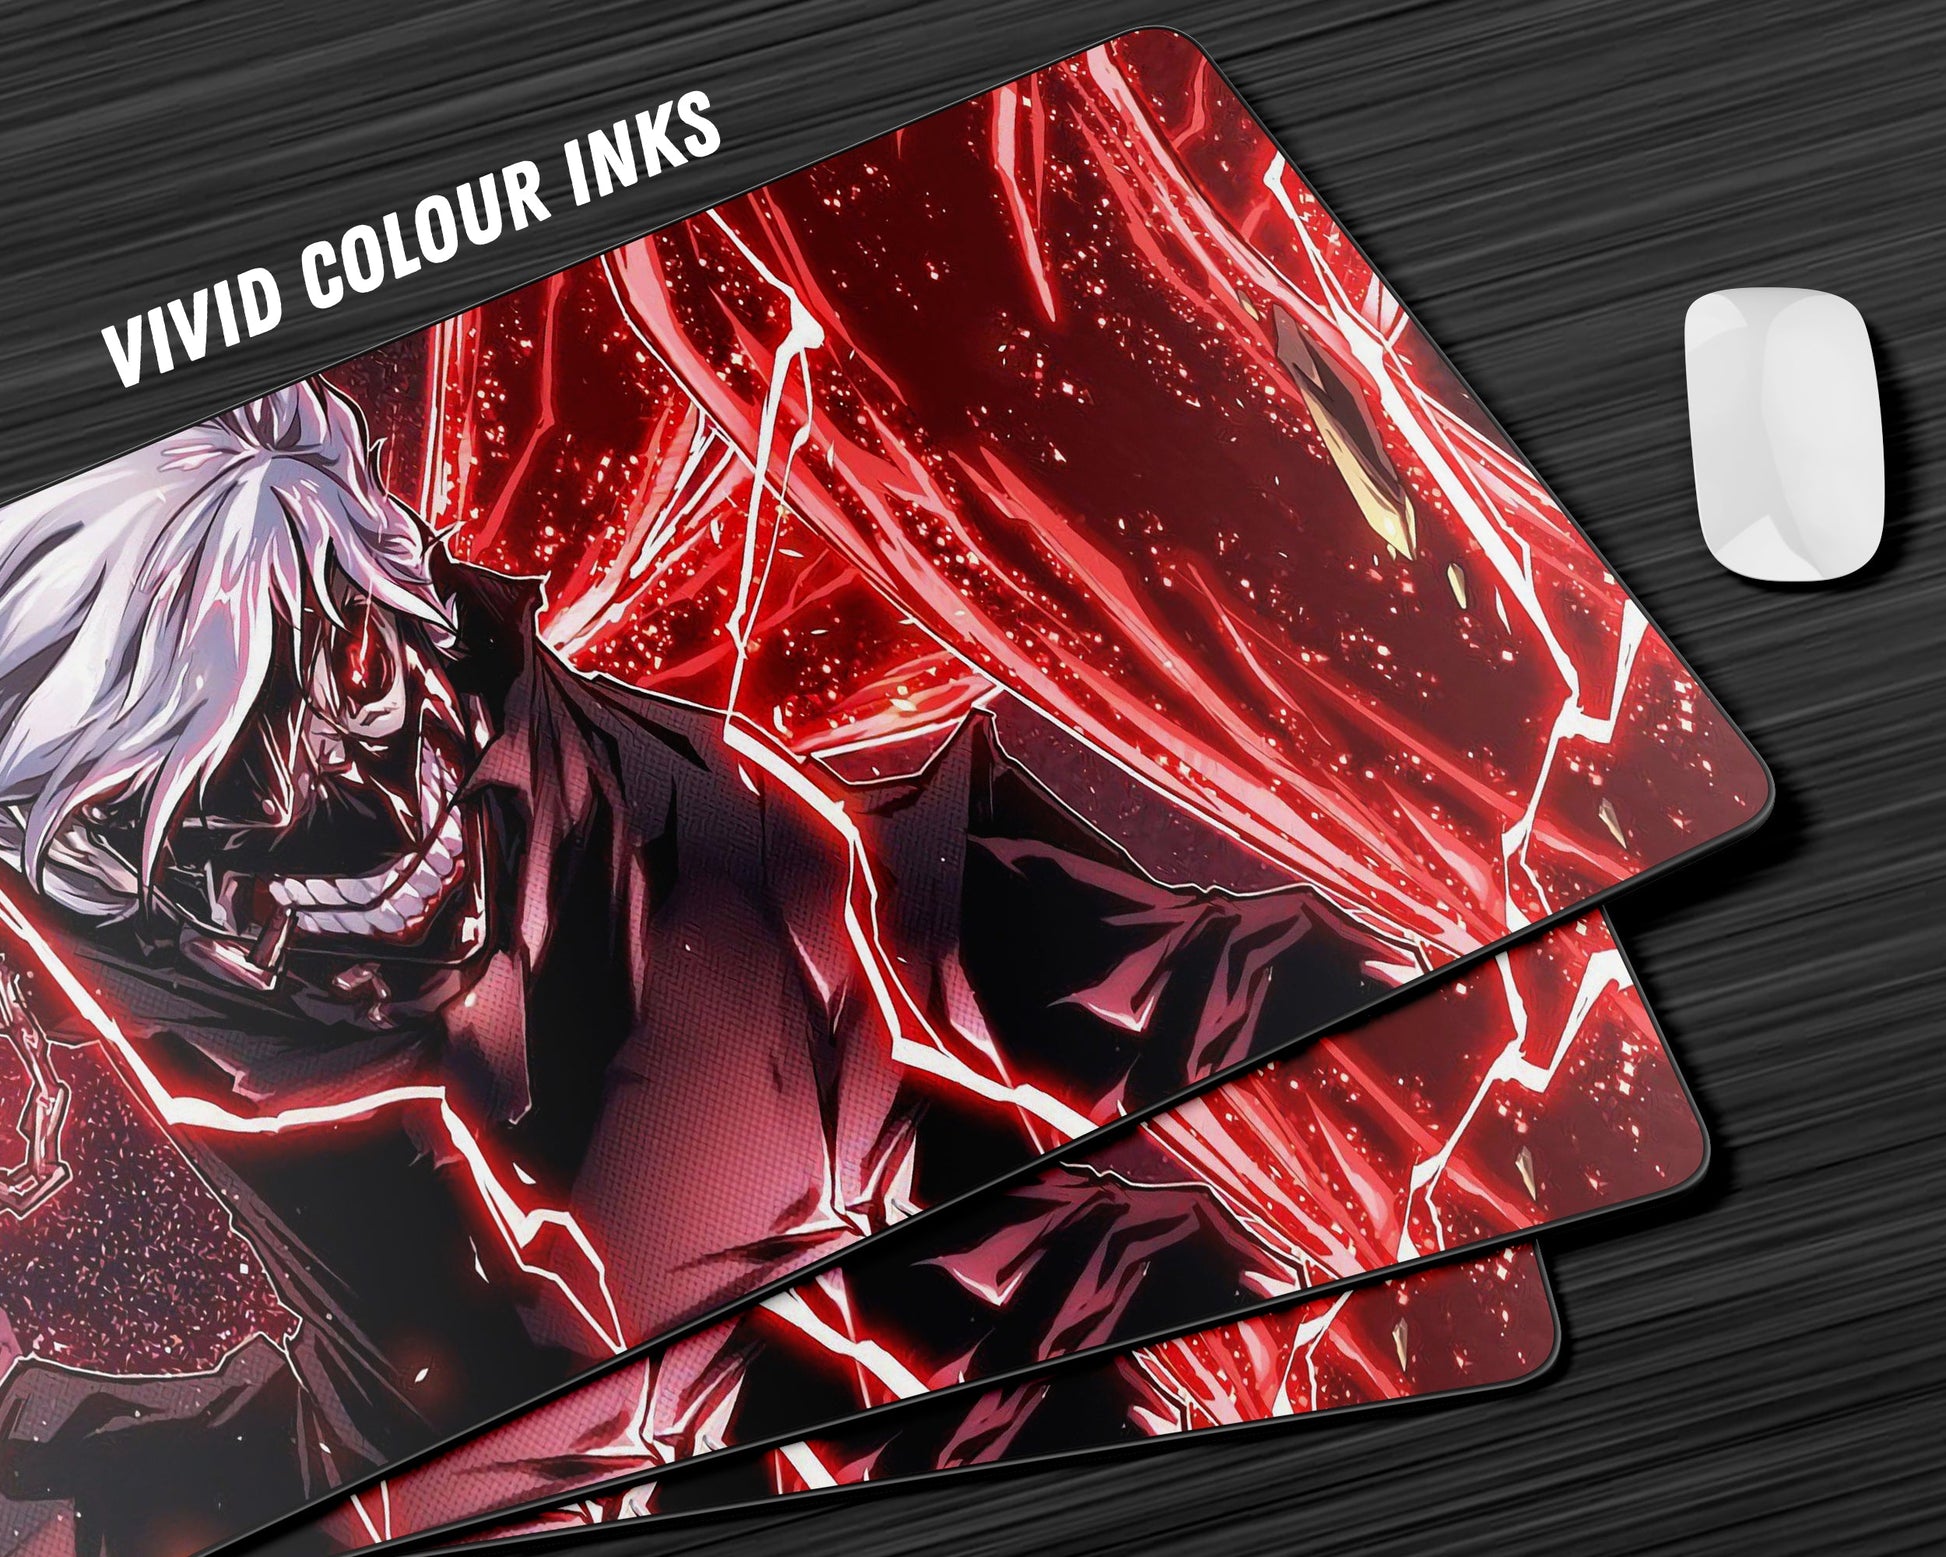 Anime Town Creations Mouse Pad Tokyo Ghoul Ken Kaneki Lightning Gaming Mouse Pad Accessories - Anime Tokyo Ghoul Gaming Mouse Pad